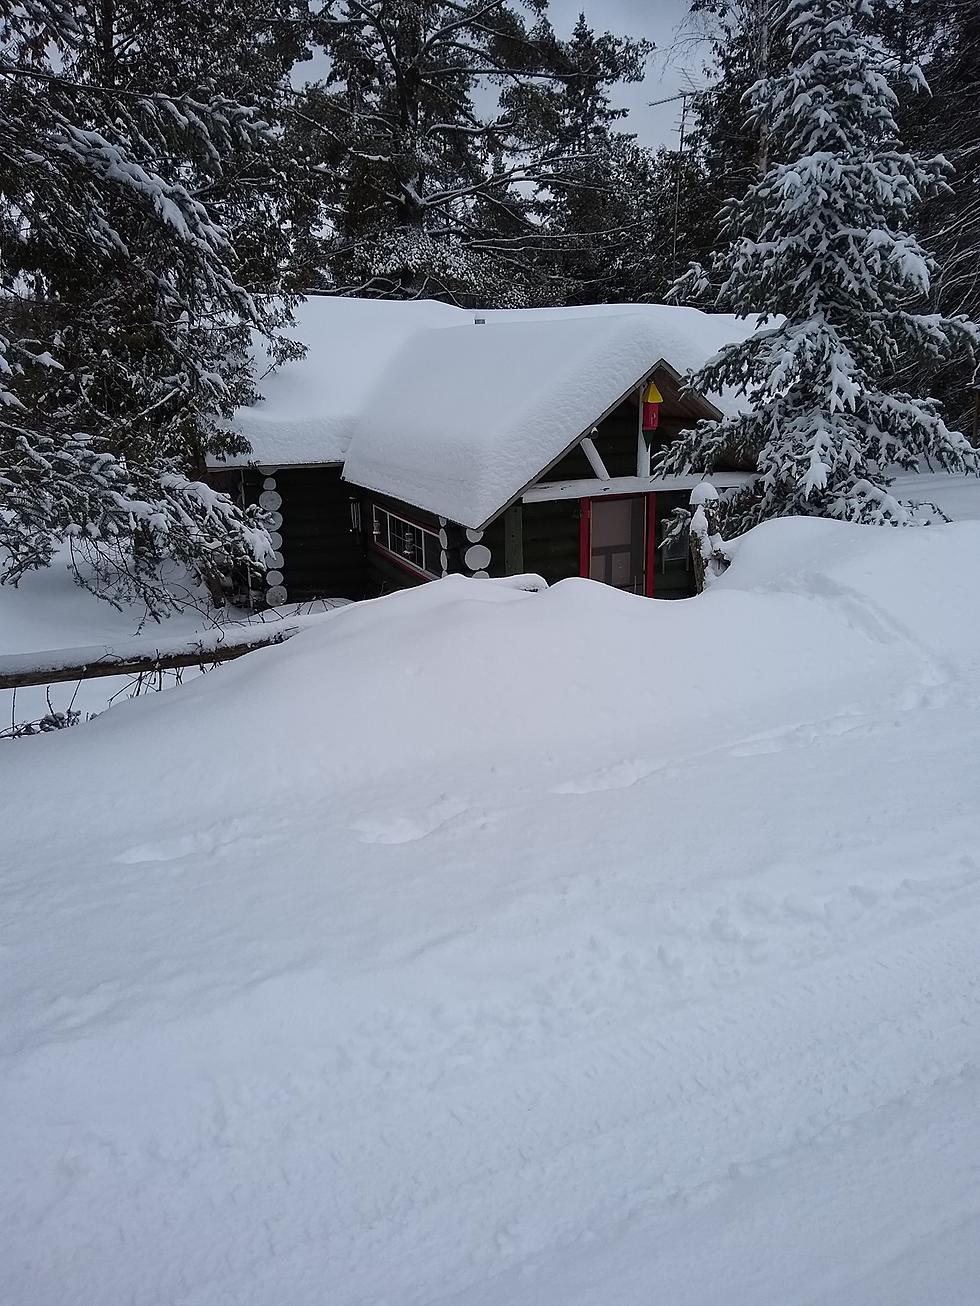 A Winter Wonderland Welcomes You At These Unique Lodges in Wisconsin